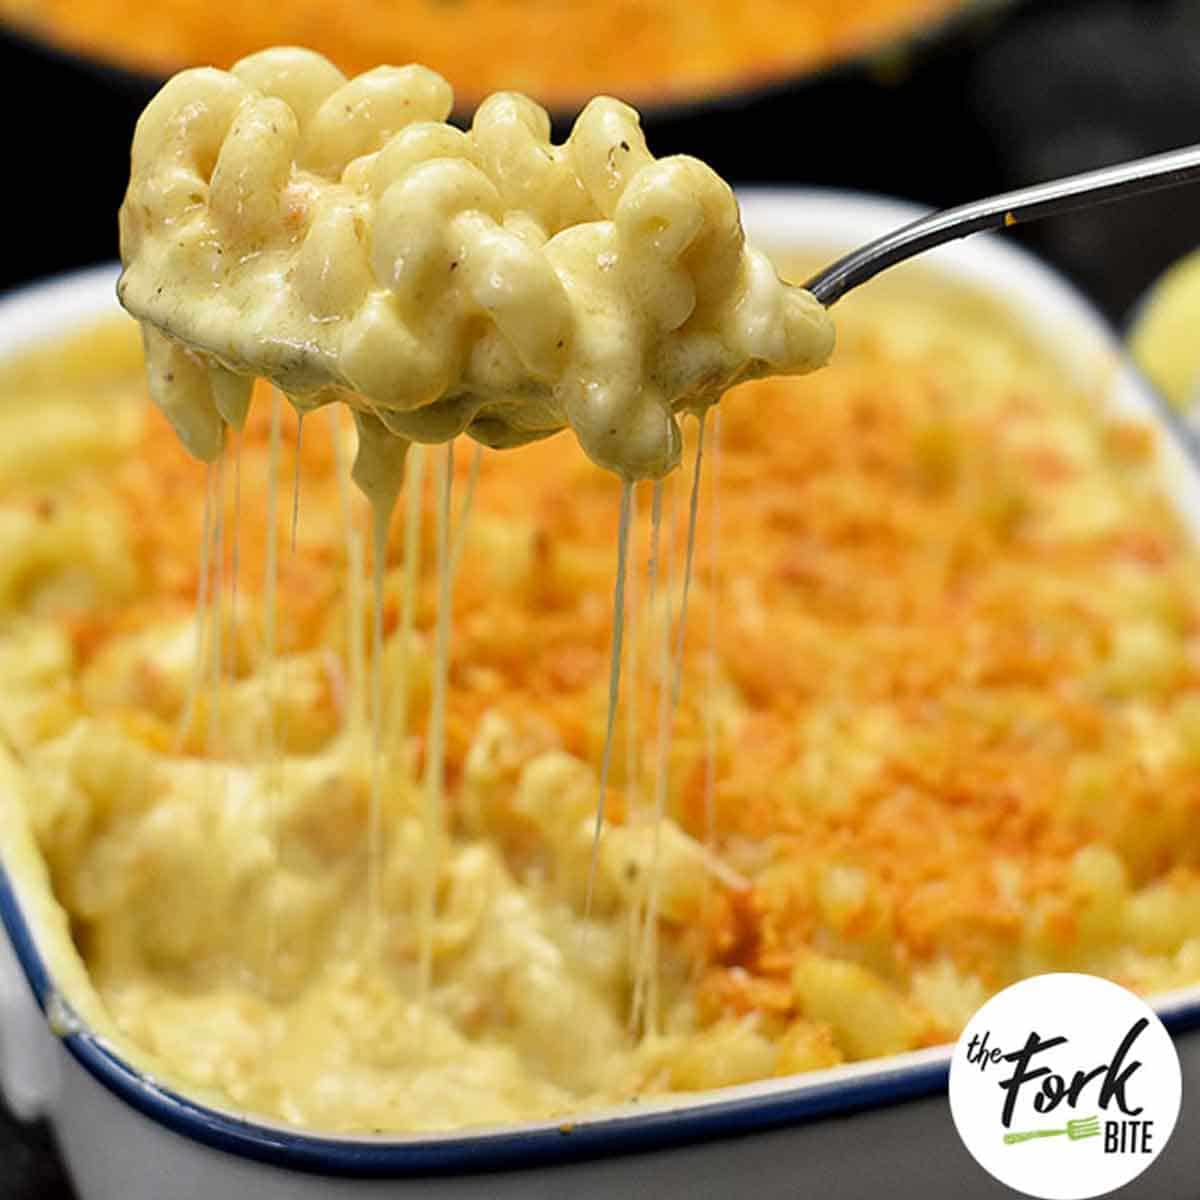 This is one of my family favorite recipes. It's so cheesy, creamy with tons of rich cheese sauce and topped with Doritos making it extra delicious!